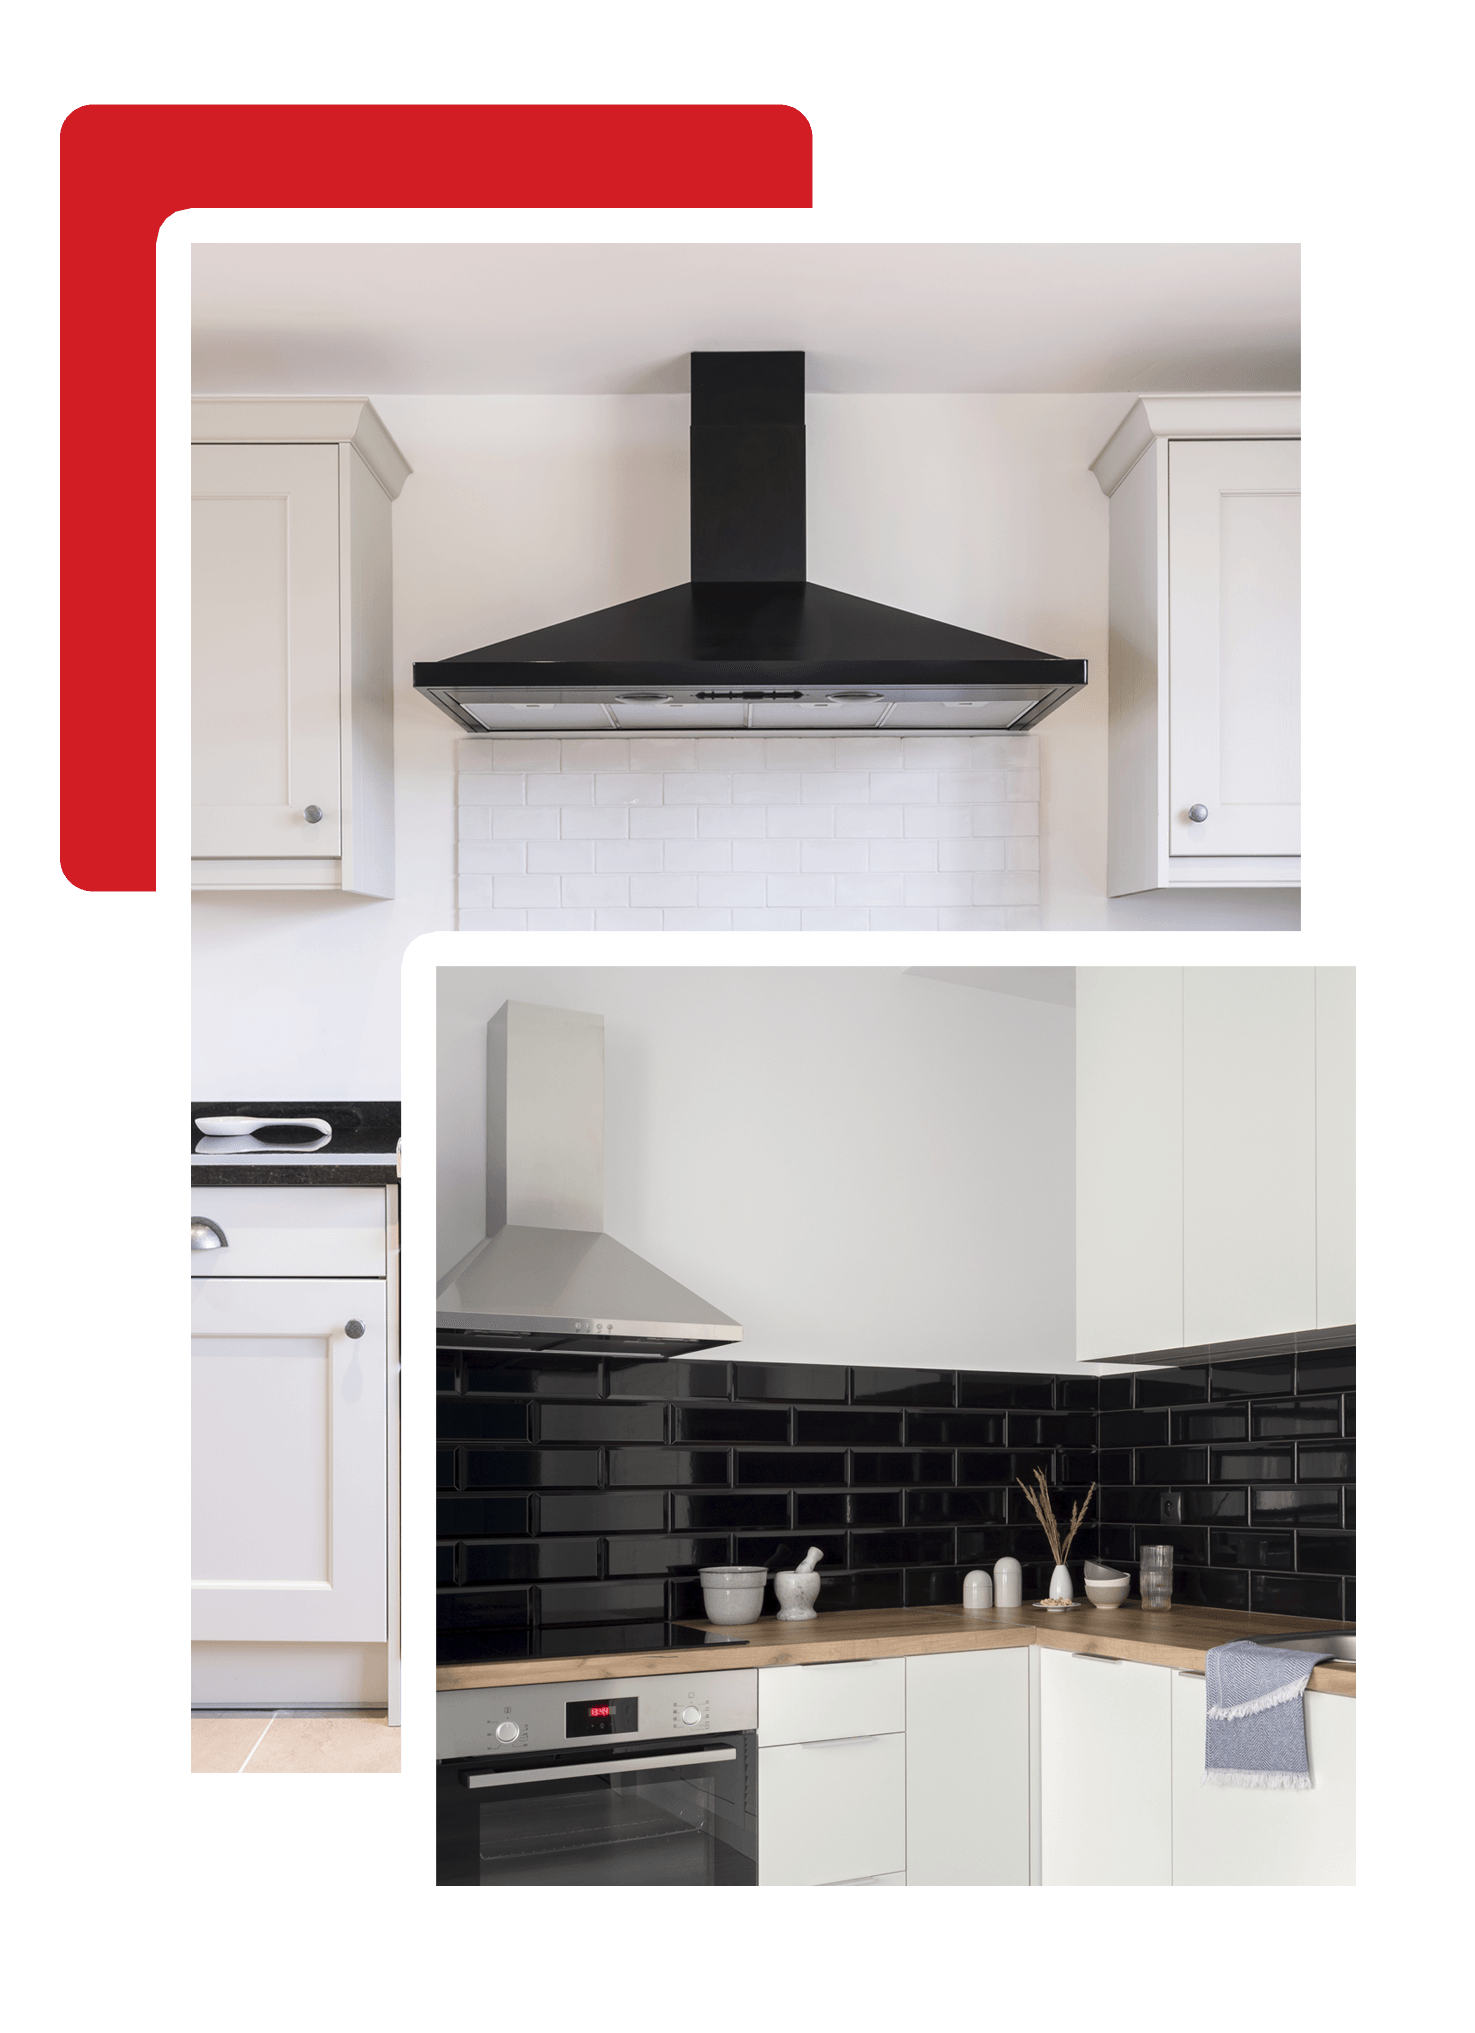 Black Enamel Oven Range Cooker with Chimney Hood in a Modern Kitchen — Brisbane, QLD — Rangehood Installation and Ducting Services Pty Ltd